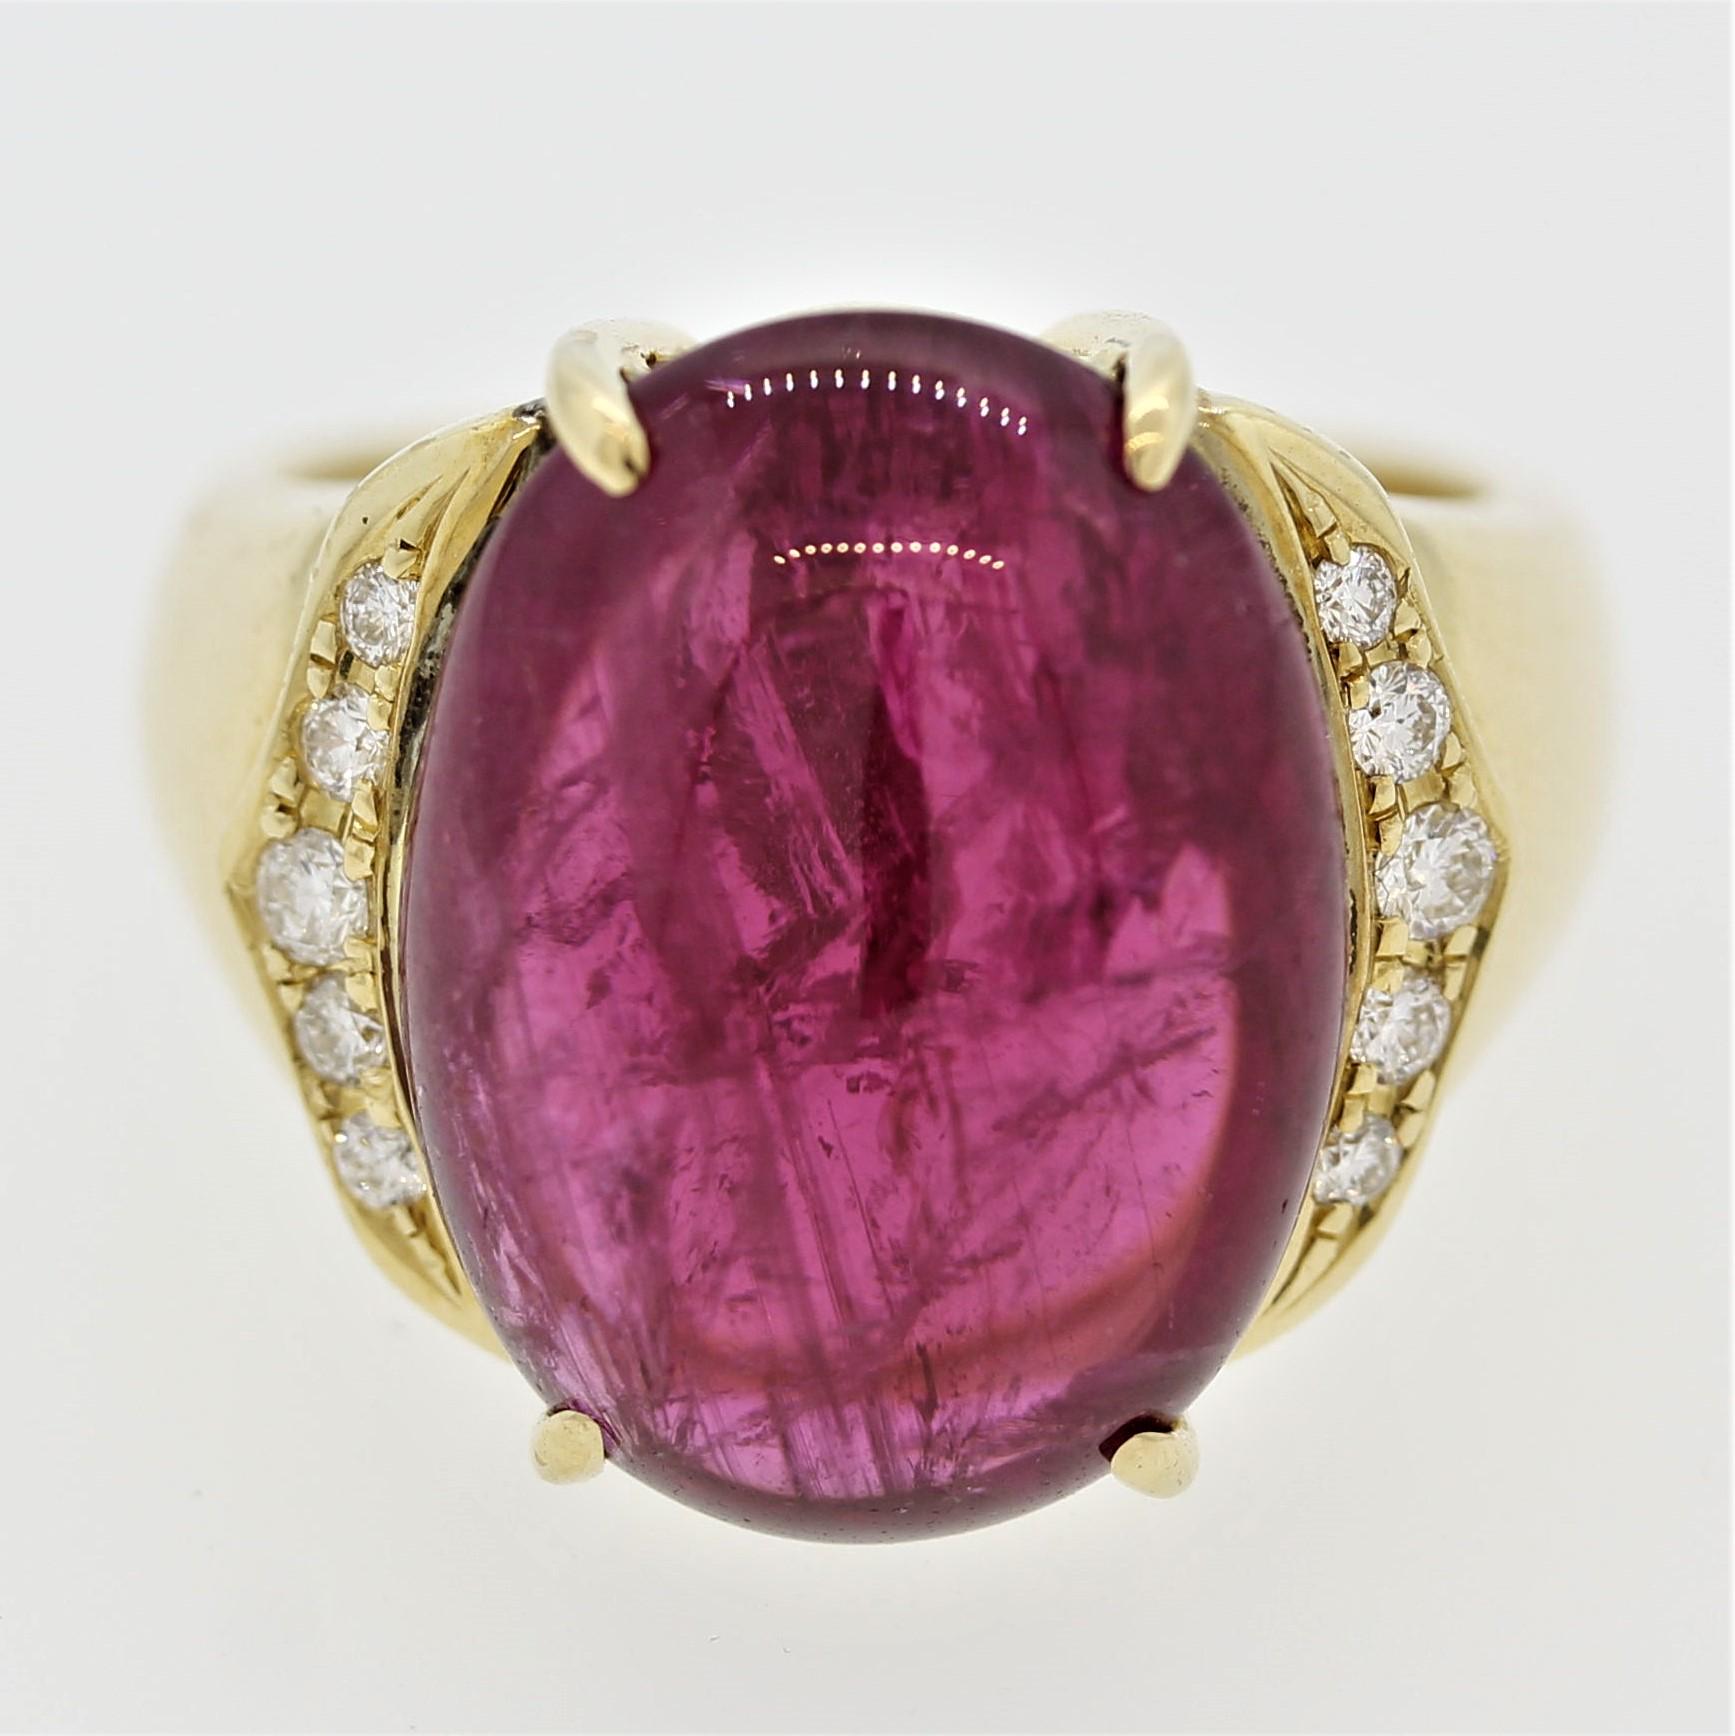 A simple yet chic ring featuring a bright red tourmaline. The red tourmaline, known in the trade as rubelite, is cut as a cabochon and weighs 13.66 carats. It is a fine red color rarely seen in other gemstones. It is accented by 0.20 carats of round